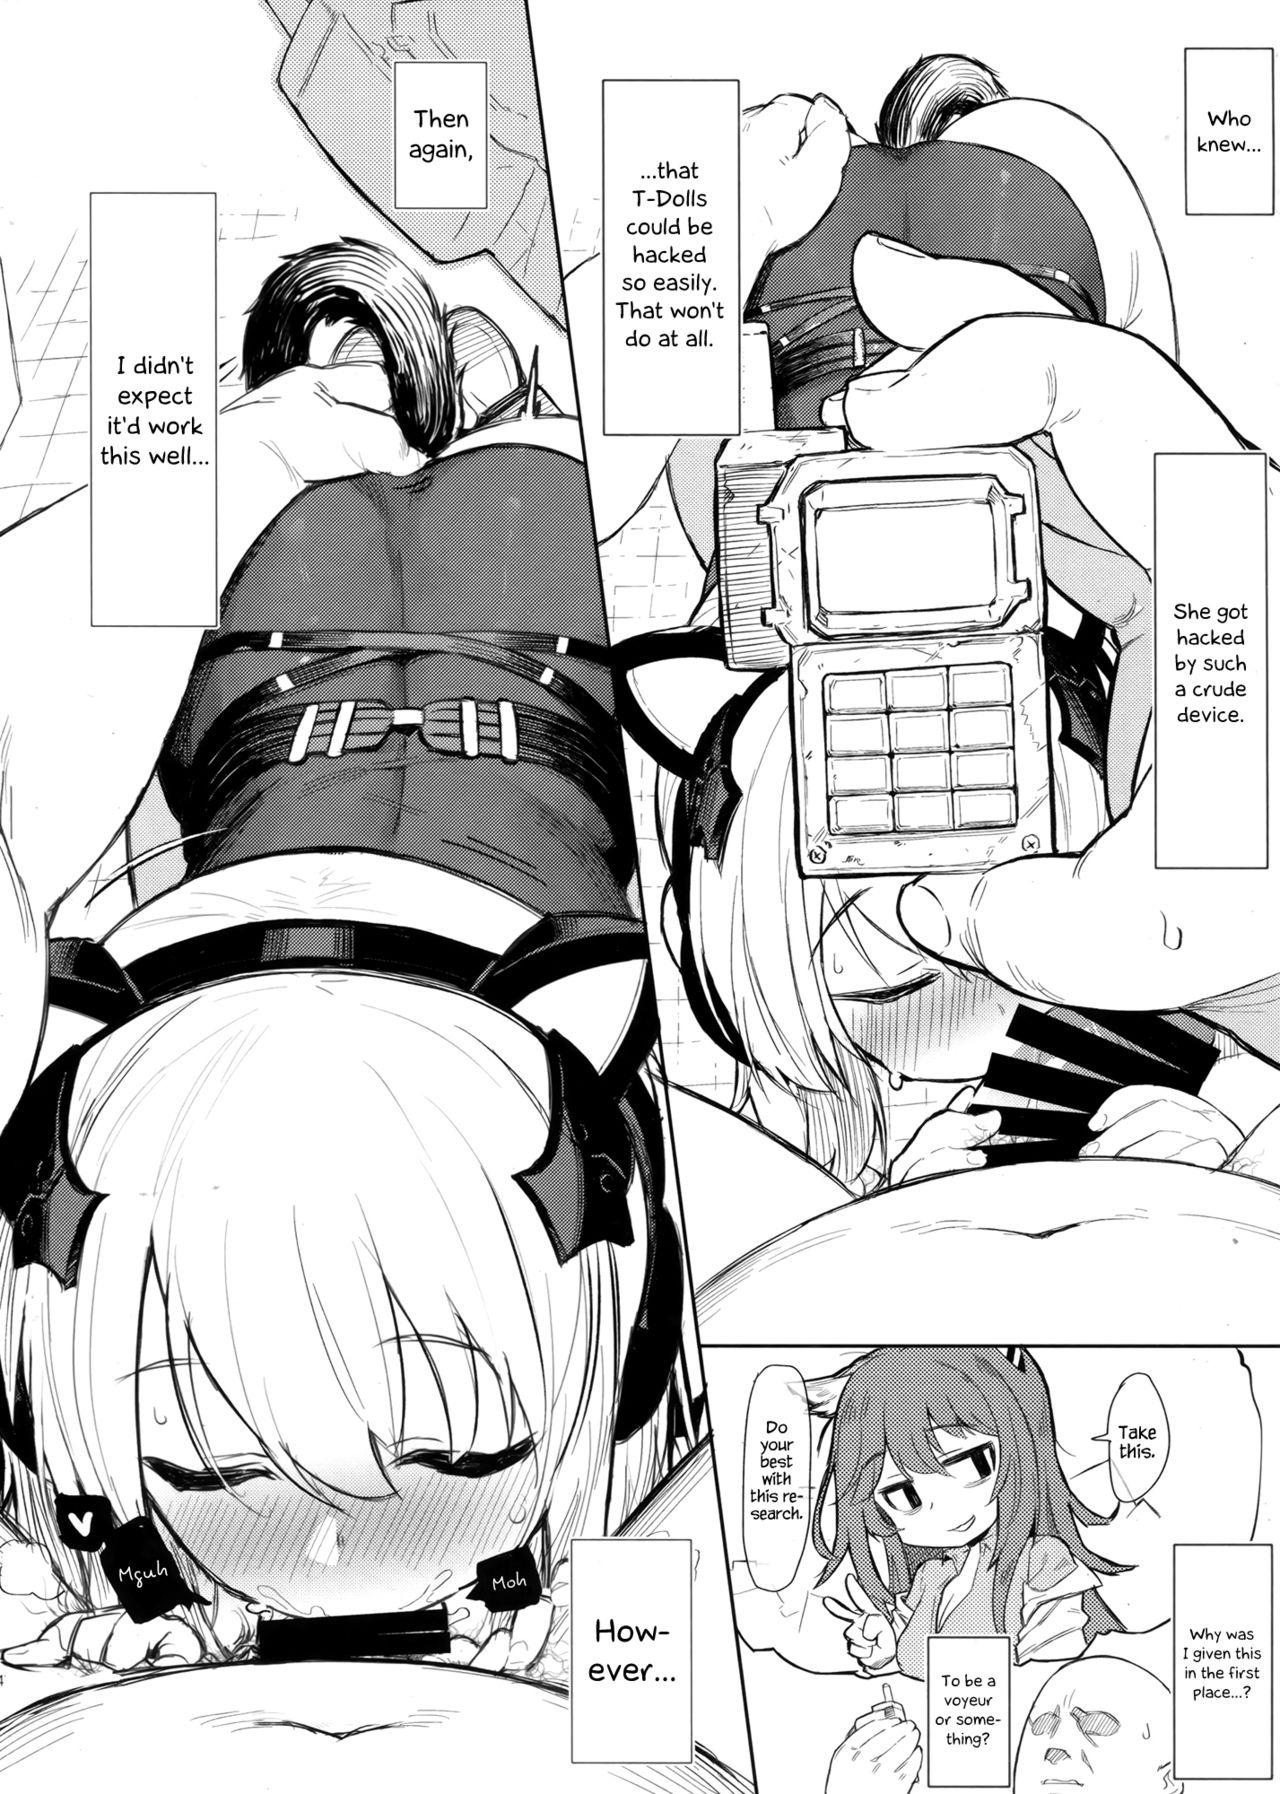 Best Blowjob Ever Saimin TMP - Girls frontline Hugecock - Page 3